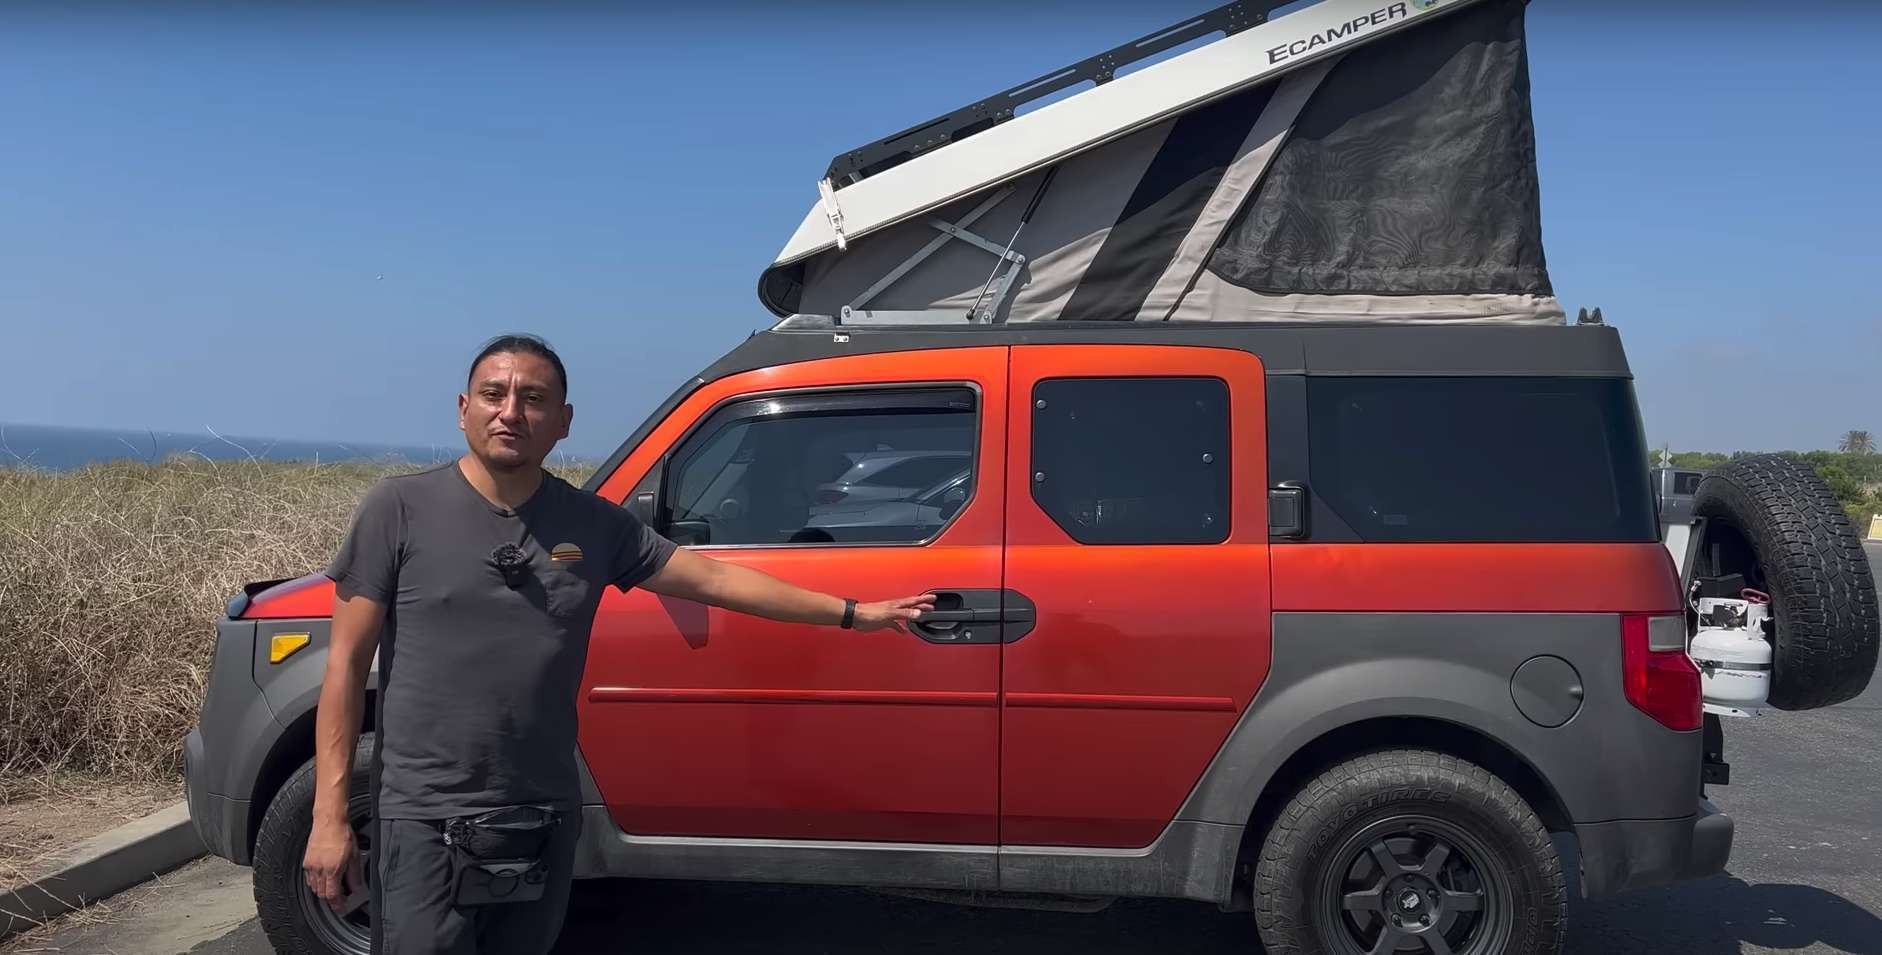 Is This the best honda element camper build